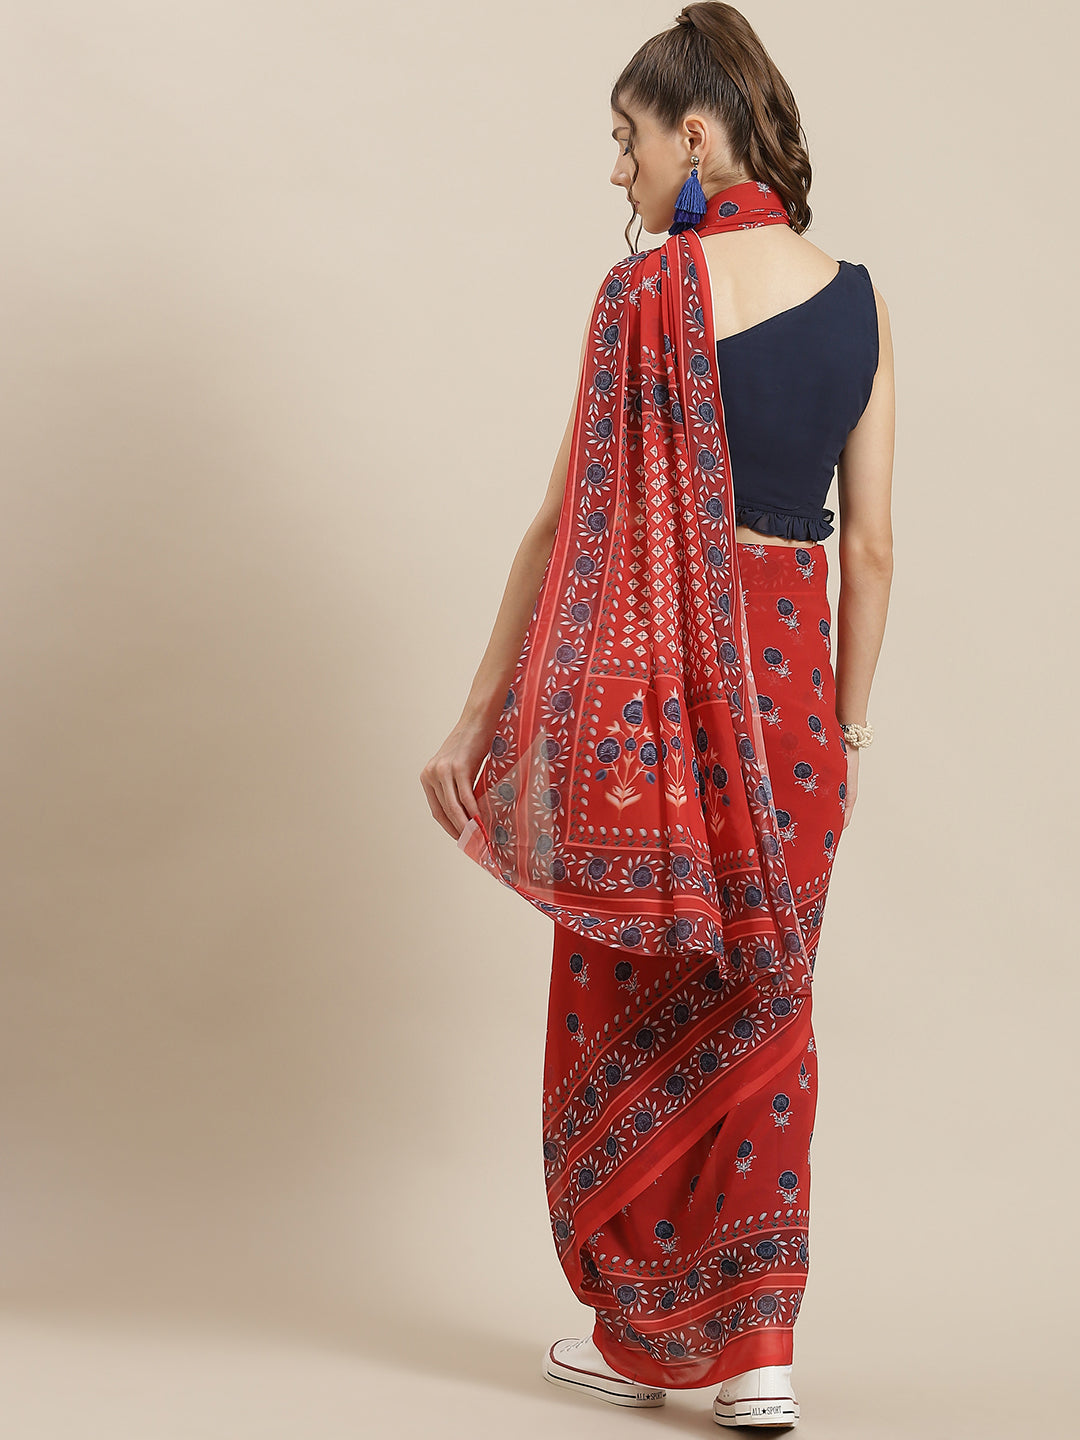 Women's Red & Blue Floral Print Saree With Blouse Piece - Aks